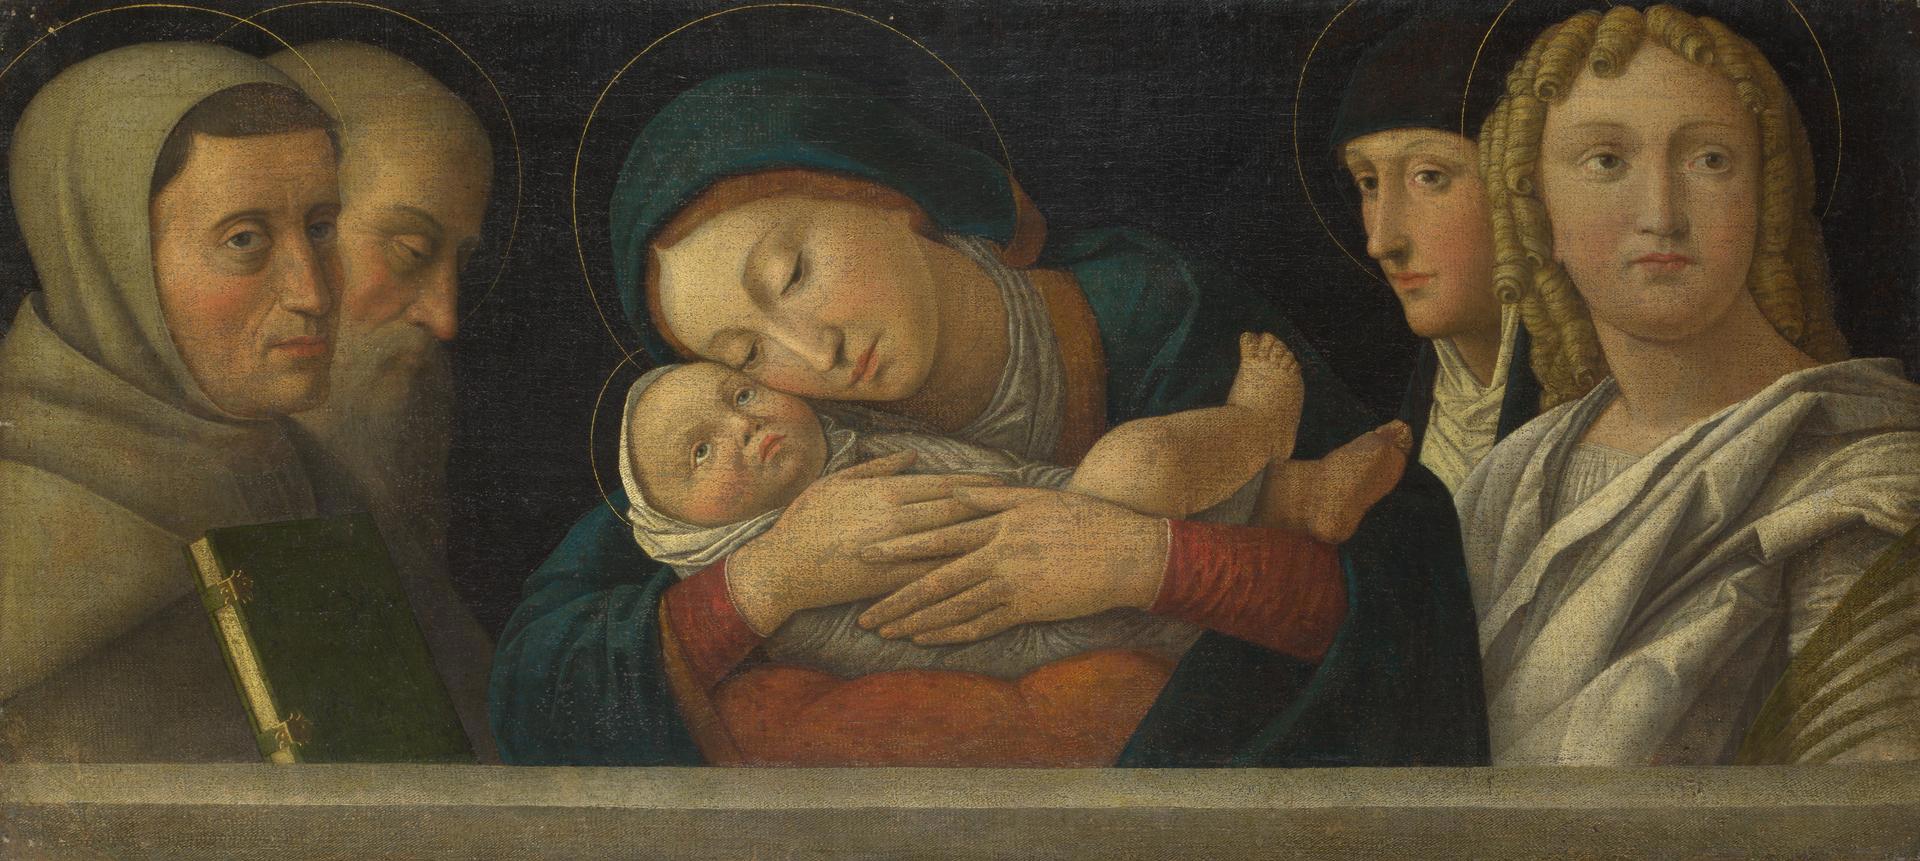 The Virgin and Child with Four Saints by Francesco Bonsignori